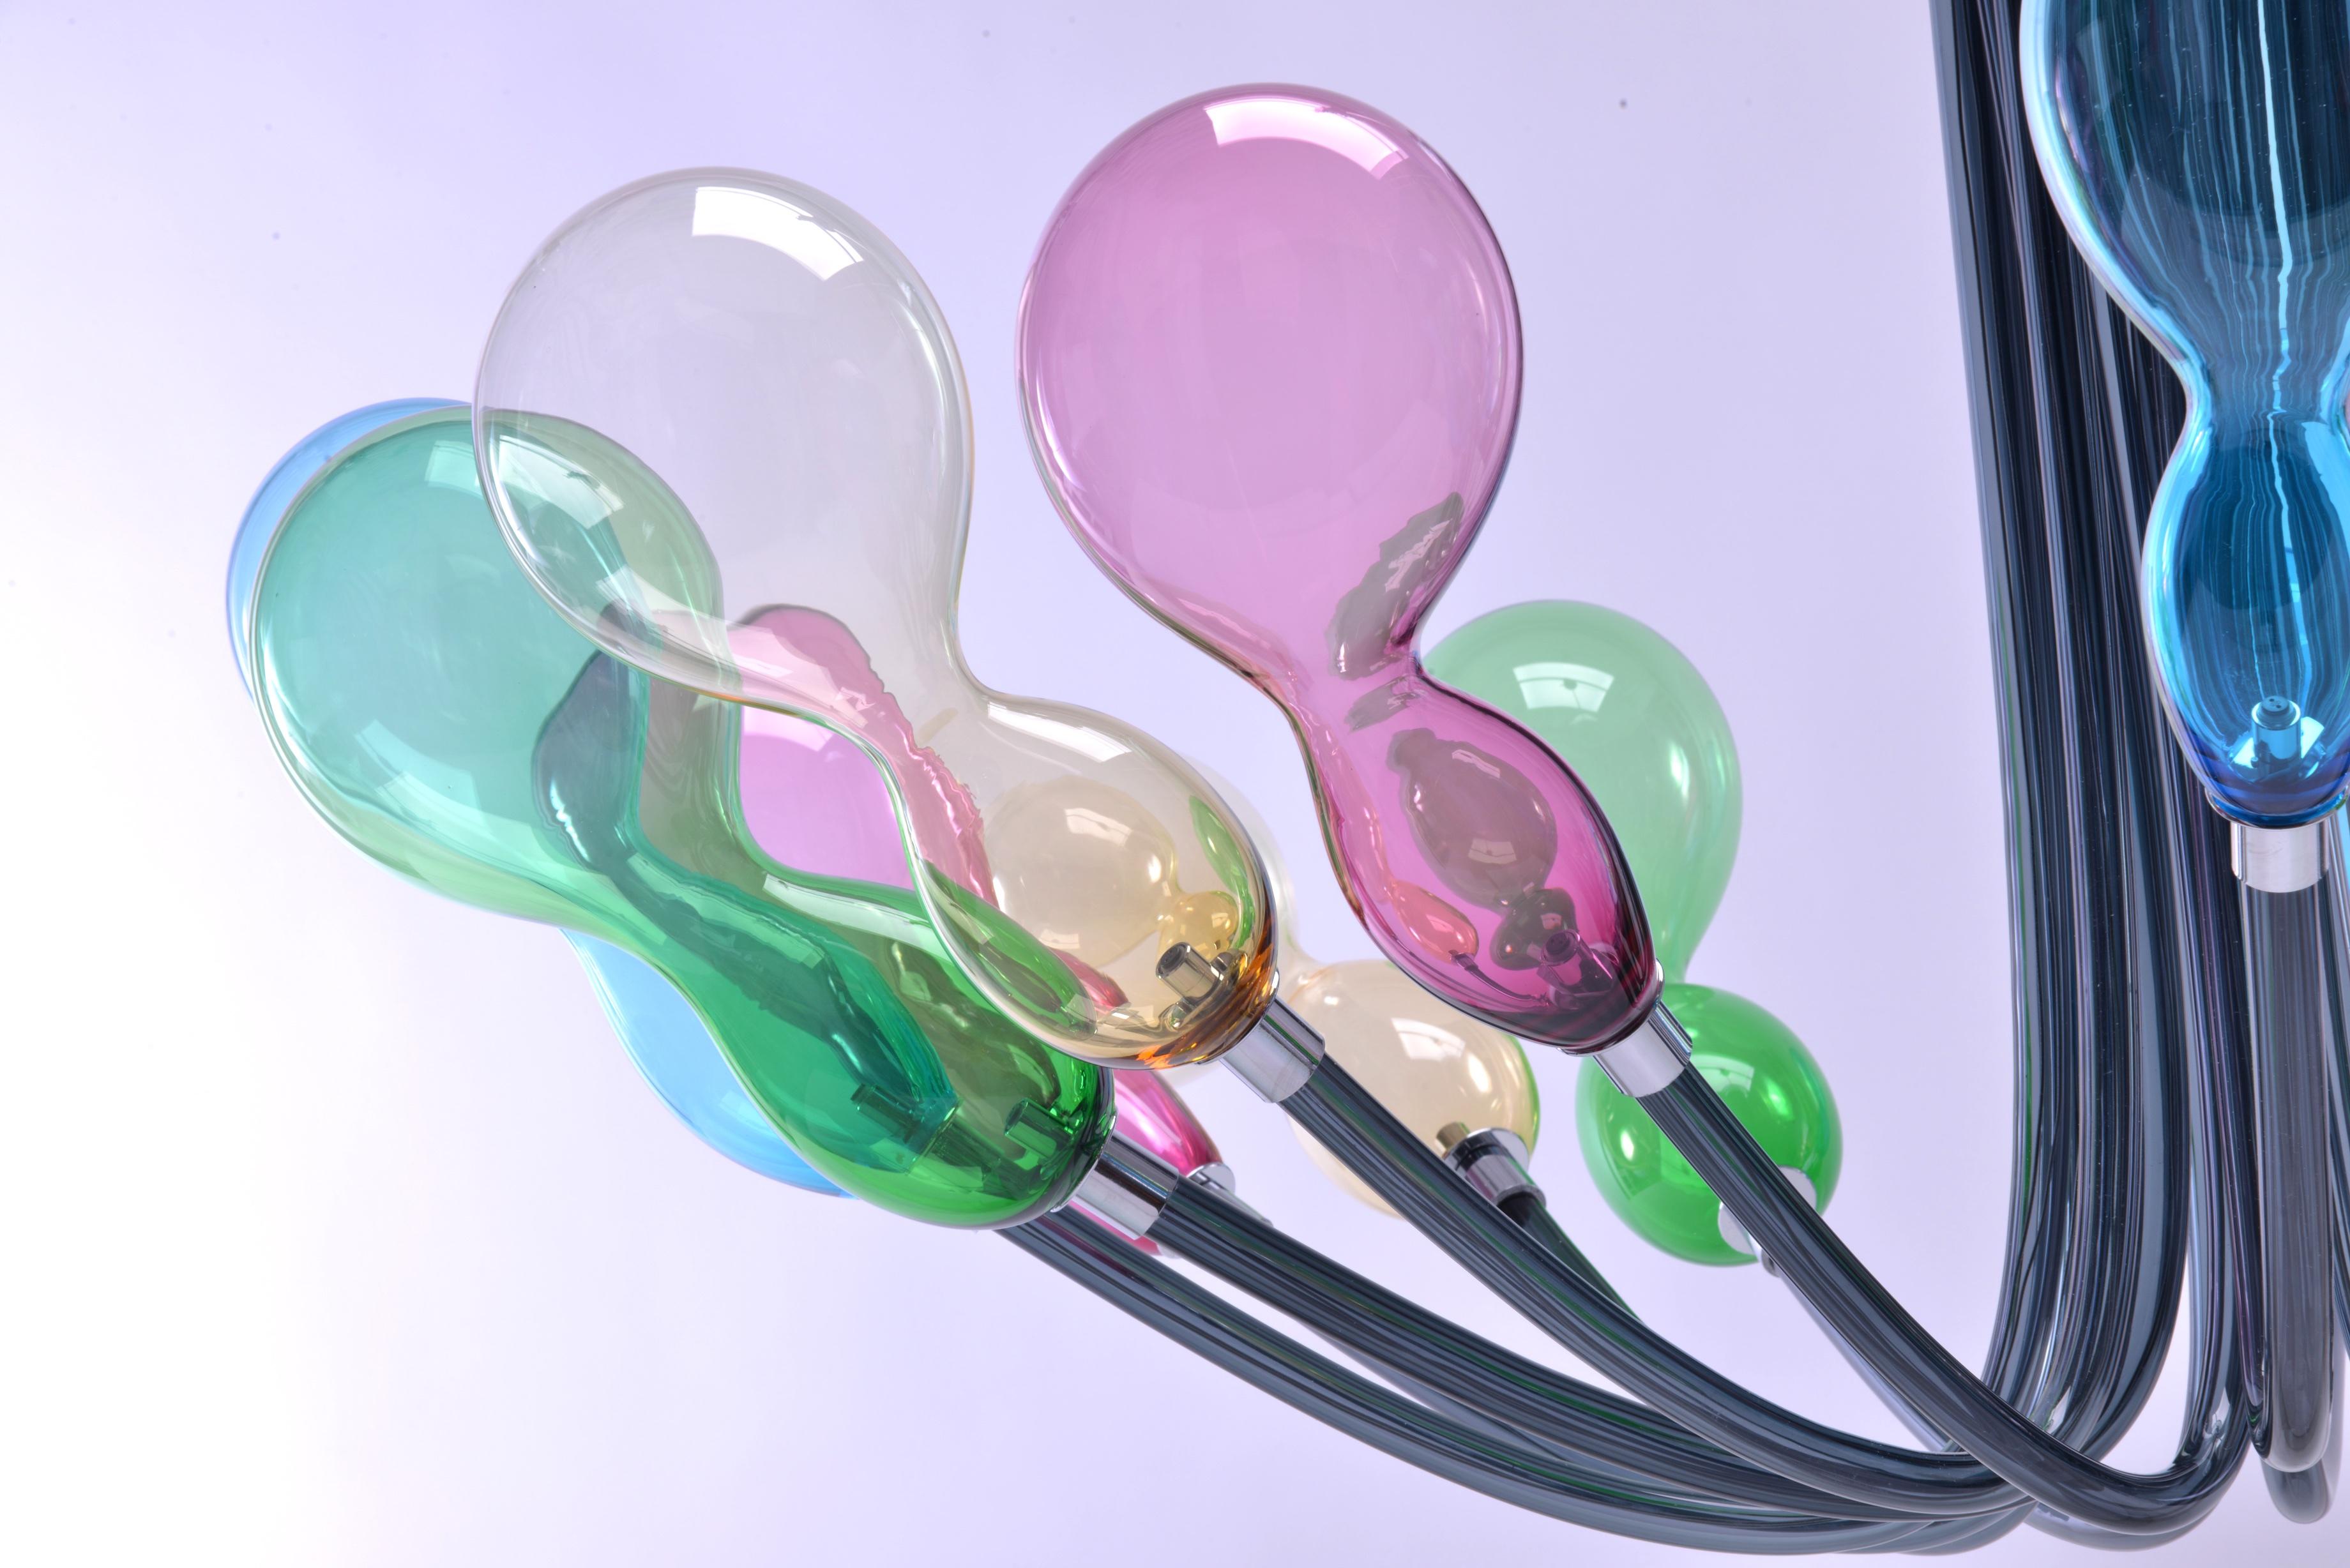 21st century Karim Rashid chandelier Blob 12-light Murano glass various colors.
The lighting parts of Blob seem to be light balloons suspended in the air, a fresh look for this new generation chandelier designed by Karim Rashid for Purho proposed